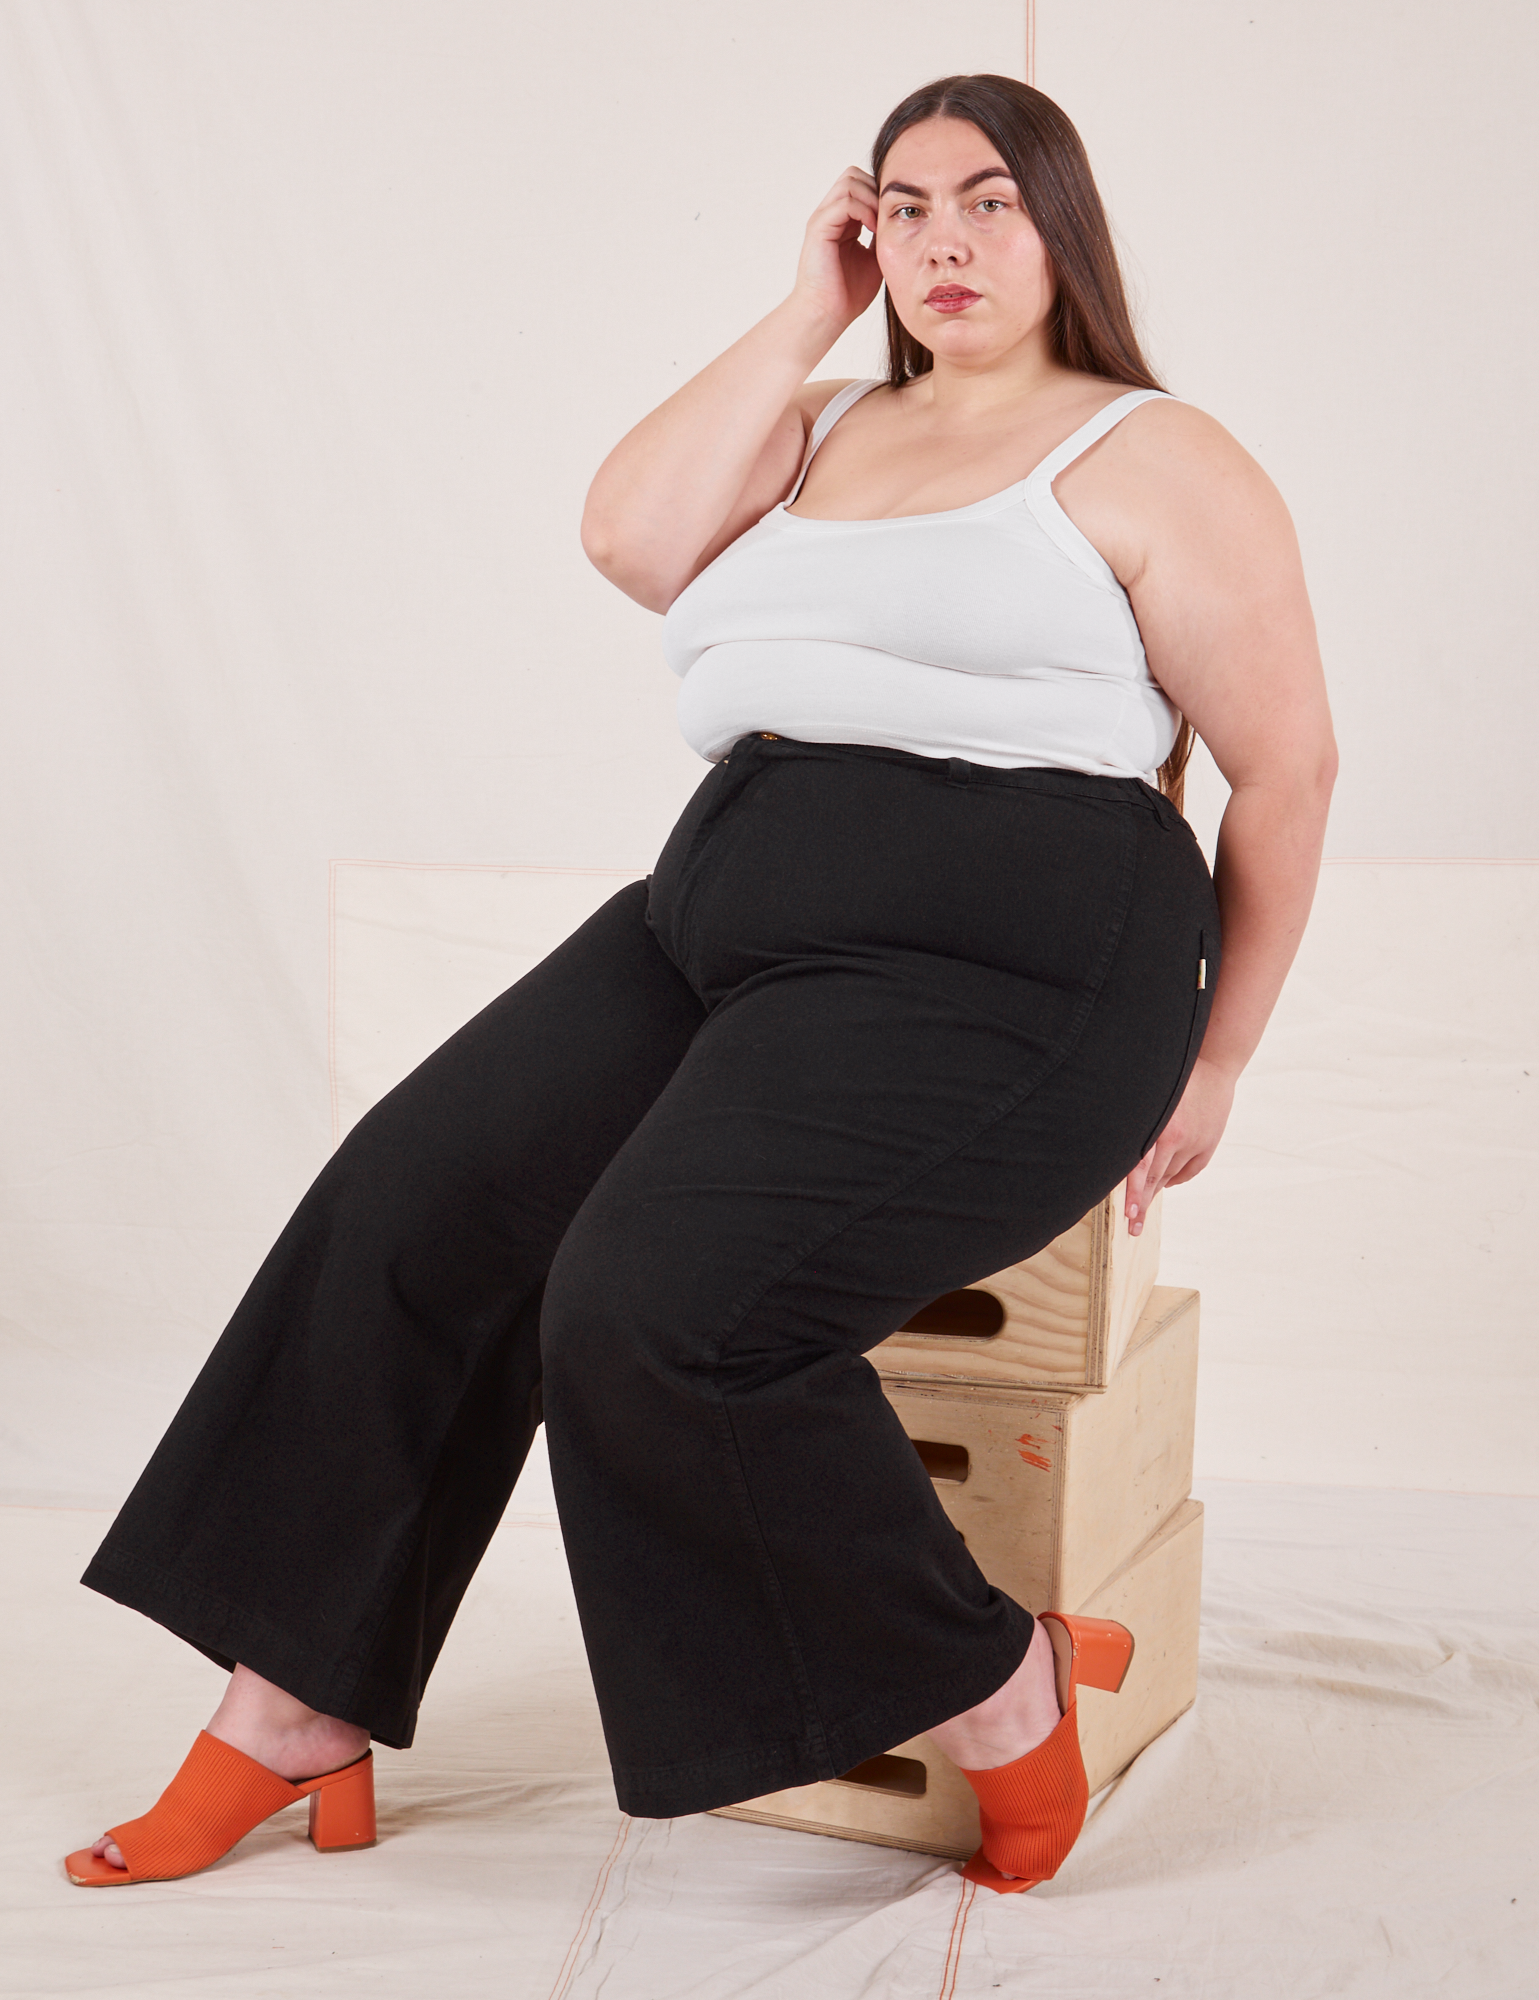 Marielena is wearing Bell Bottoms in Basic Black and vintage off-white Cami. She is sitting on a stack of wooden crates.